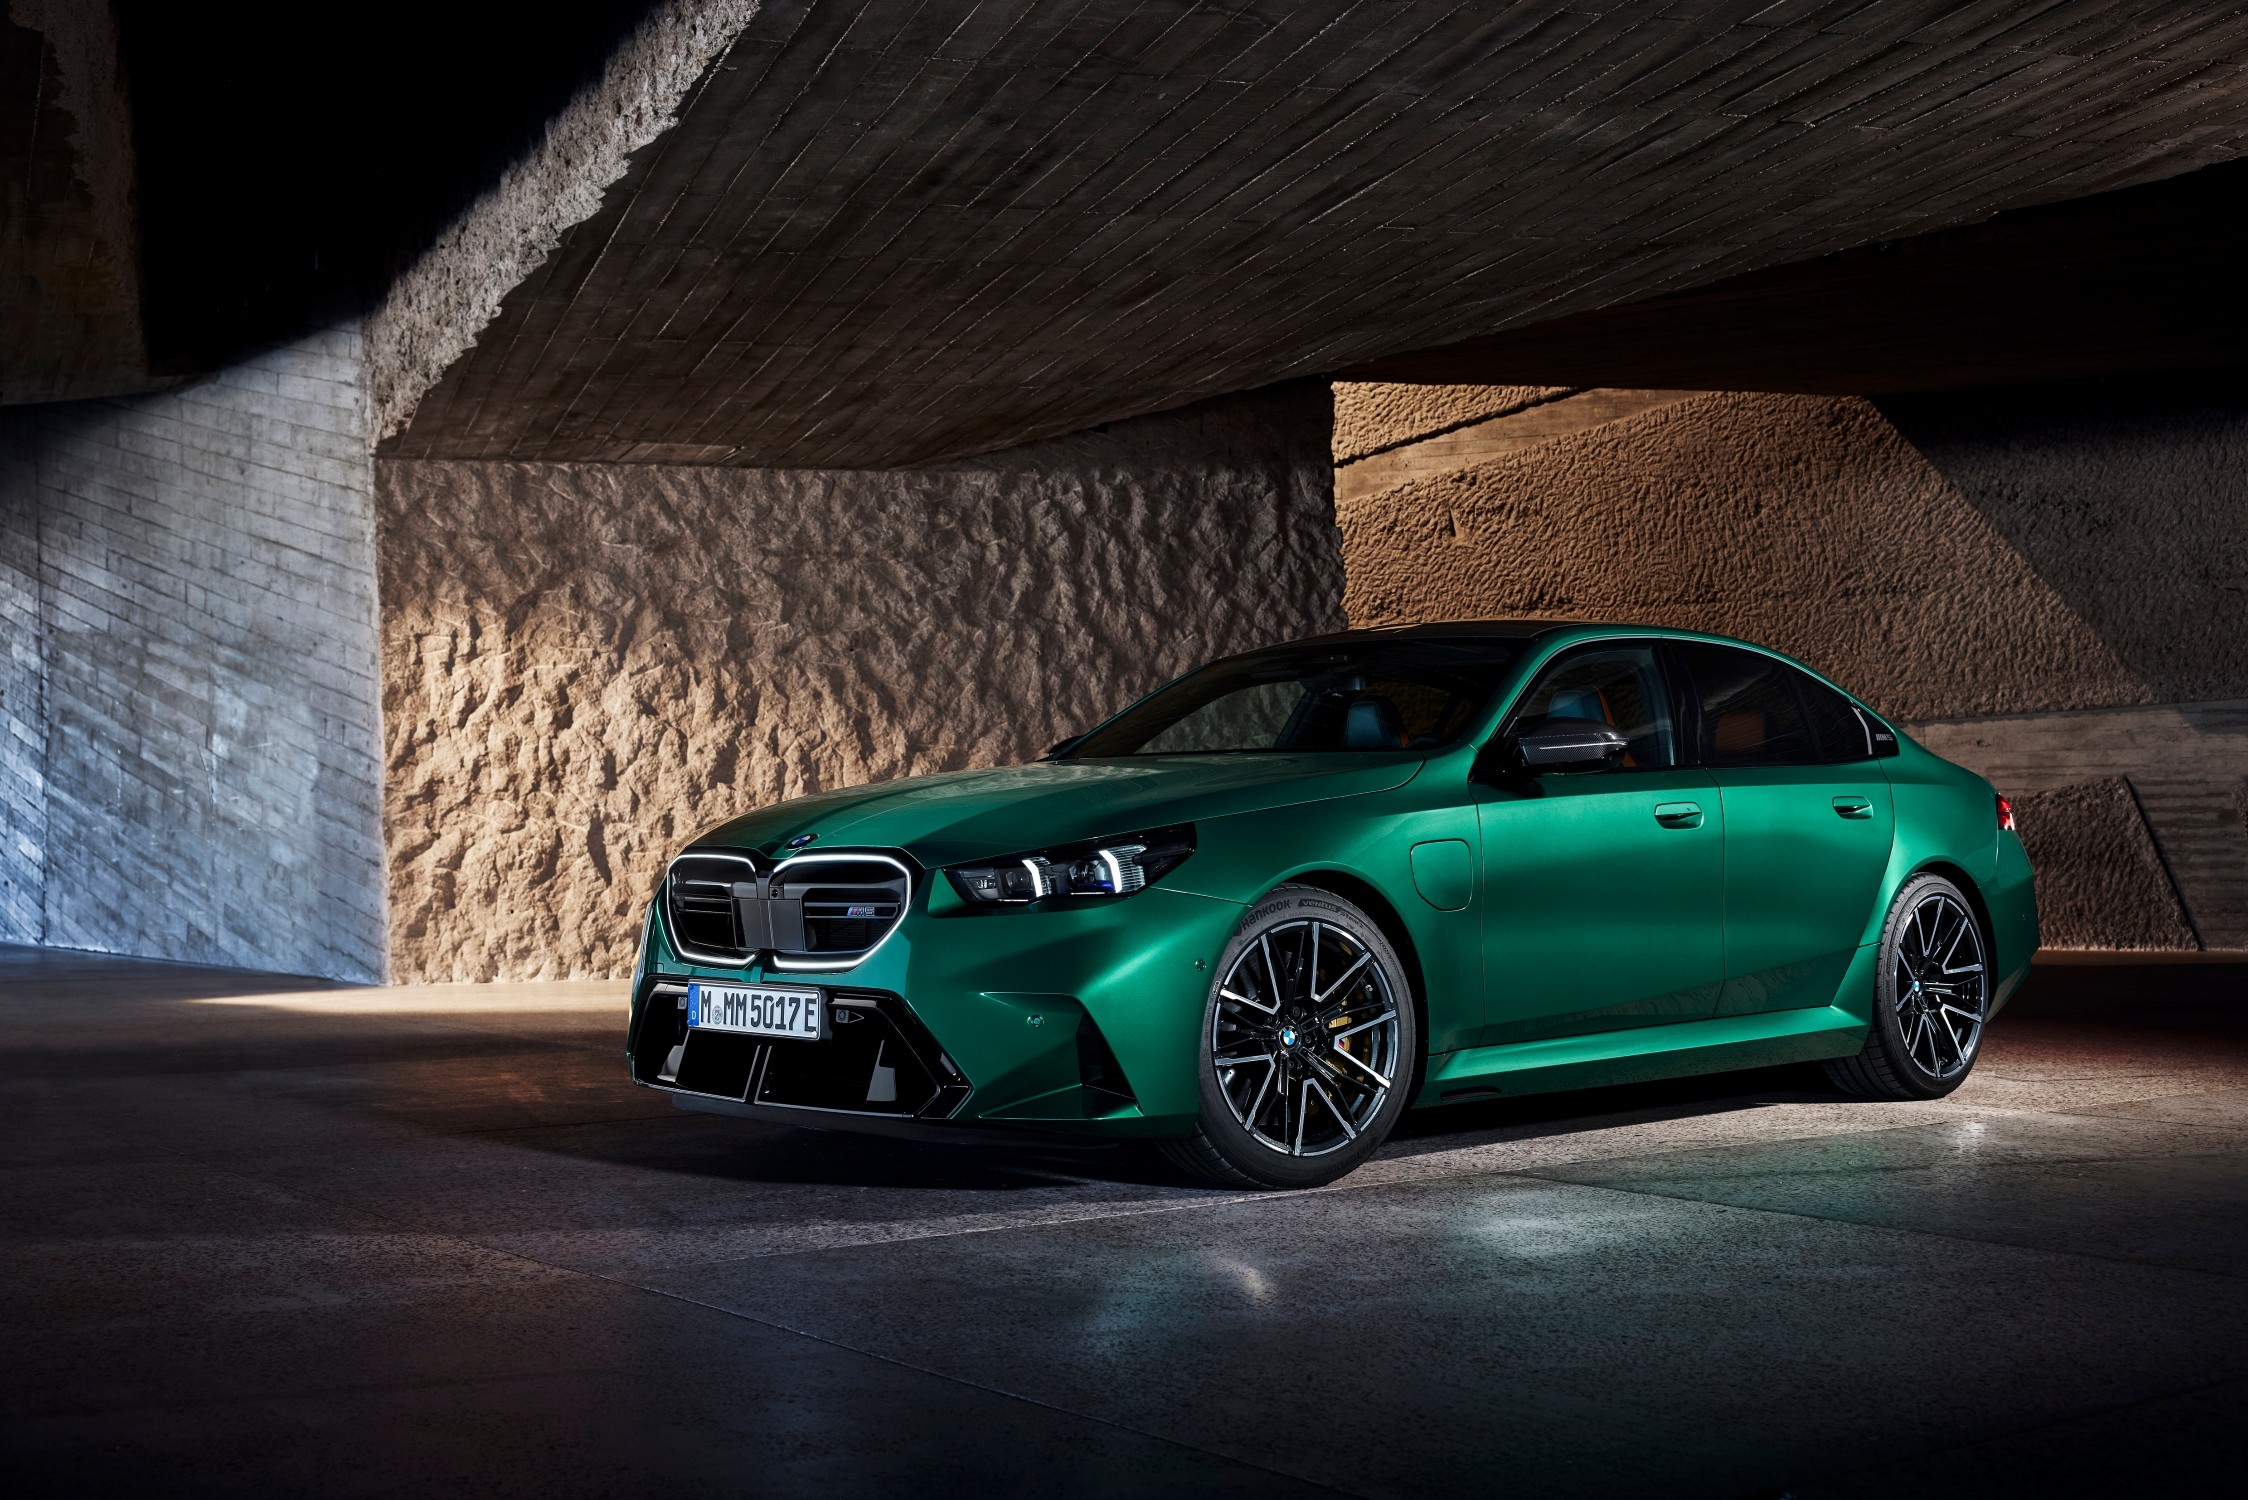 The iconic BMW M5's seventh generation debuts an electrified drive system, combining a 4.4-liter V8 engine and electric motor for 727 hp, 0-100 km/h in 3.5 seconds, and a 67 km electric range.